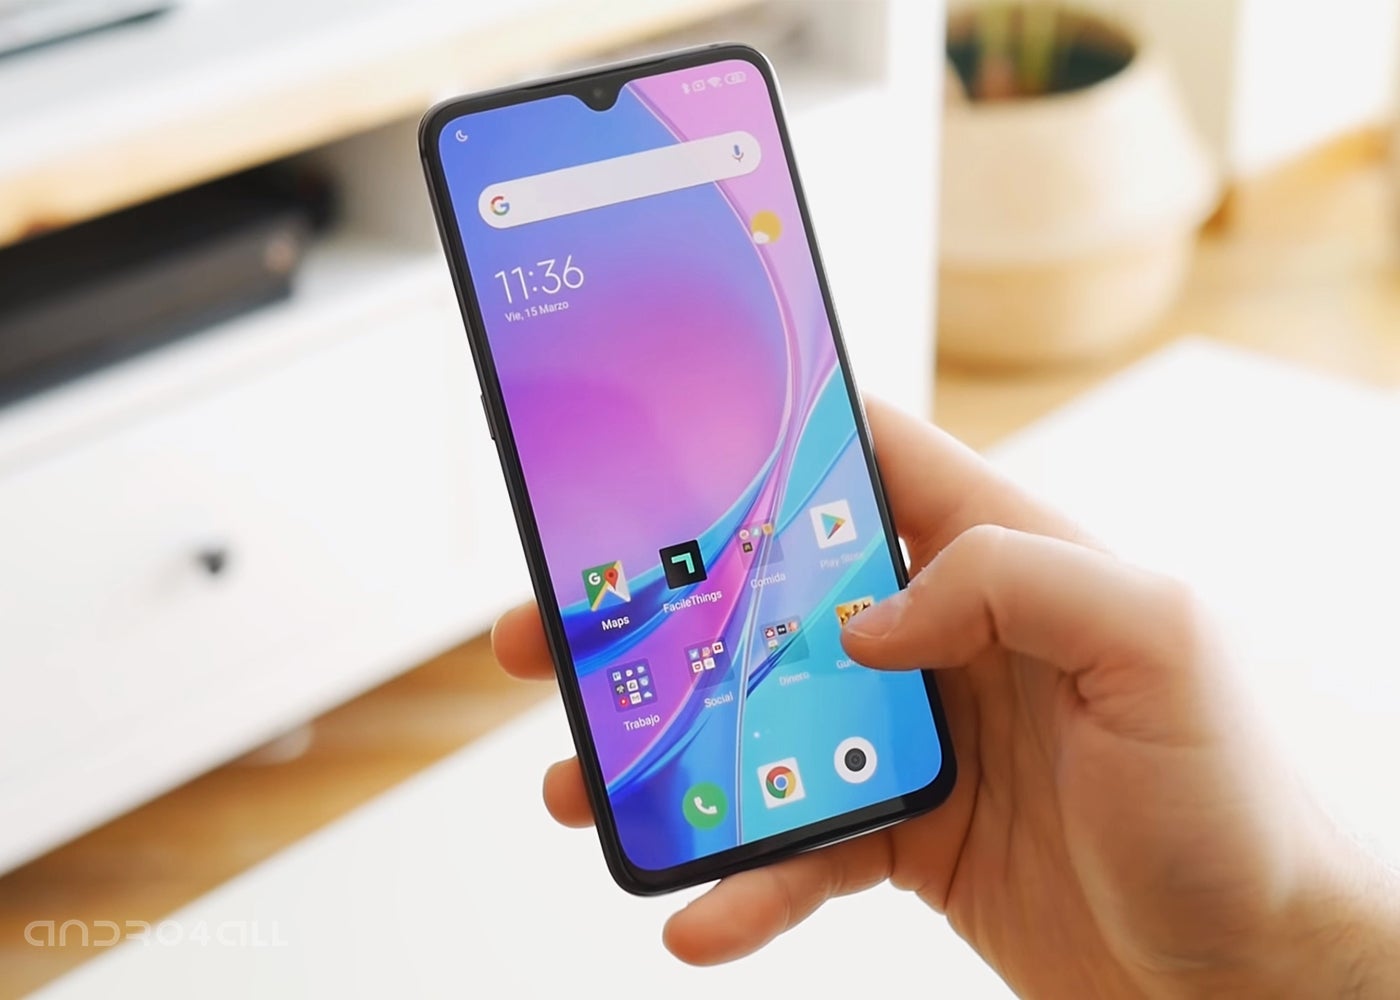 Xiaomi Mi 9 Android 10 MIUI 10 9.8.22 Update -Here's What's New